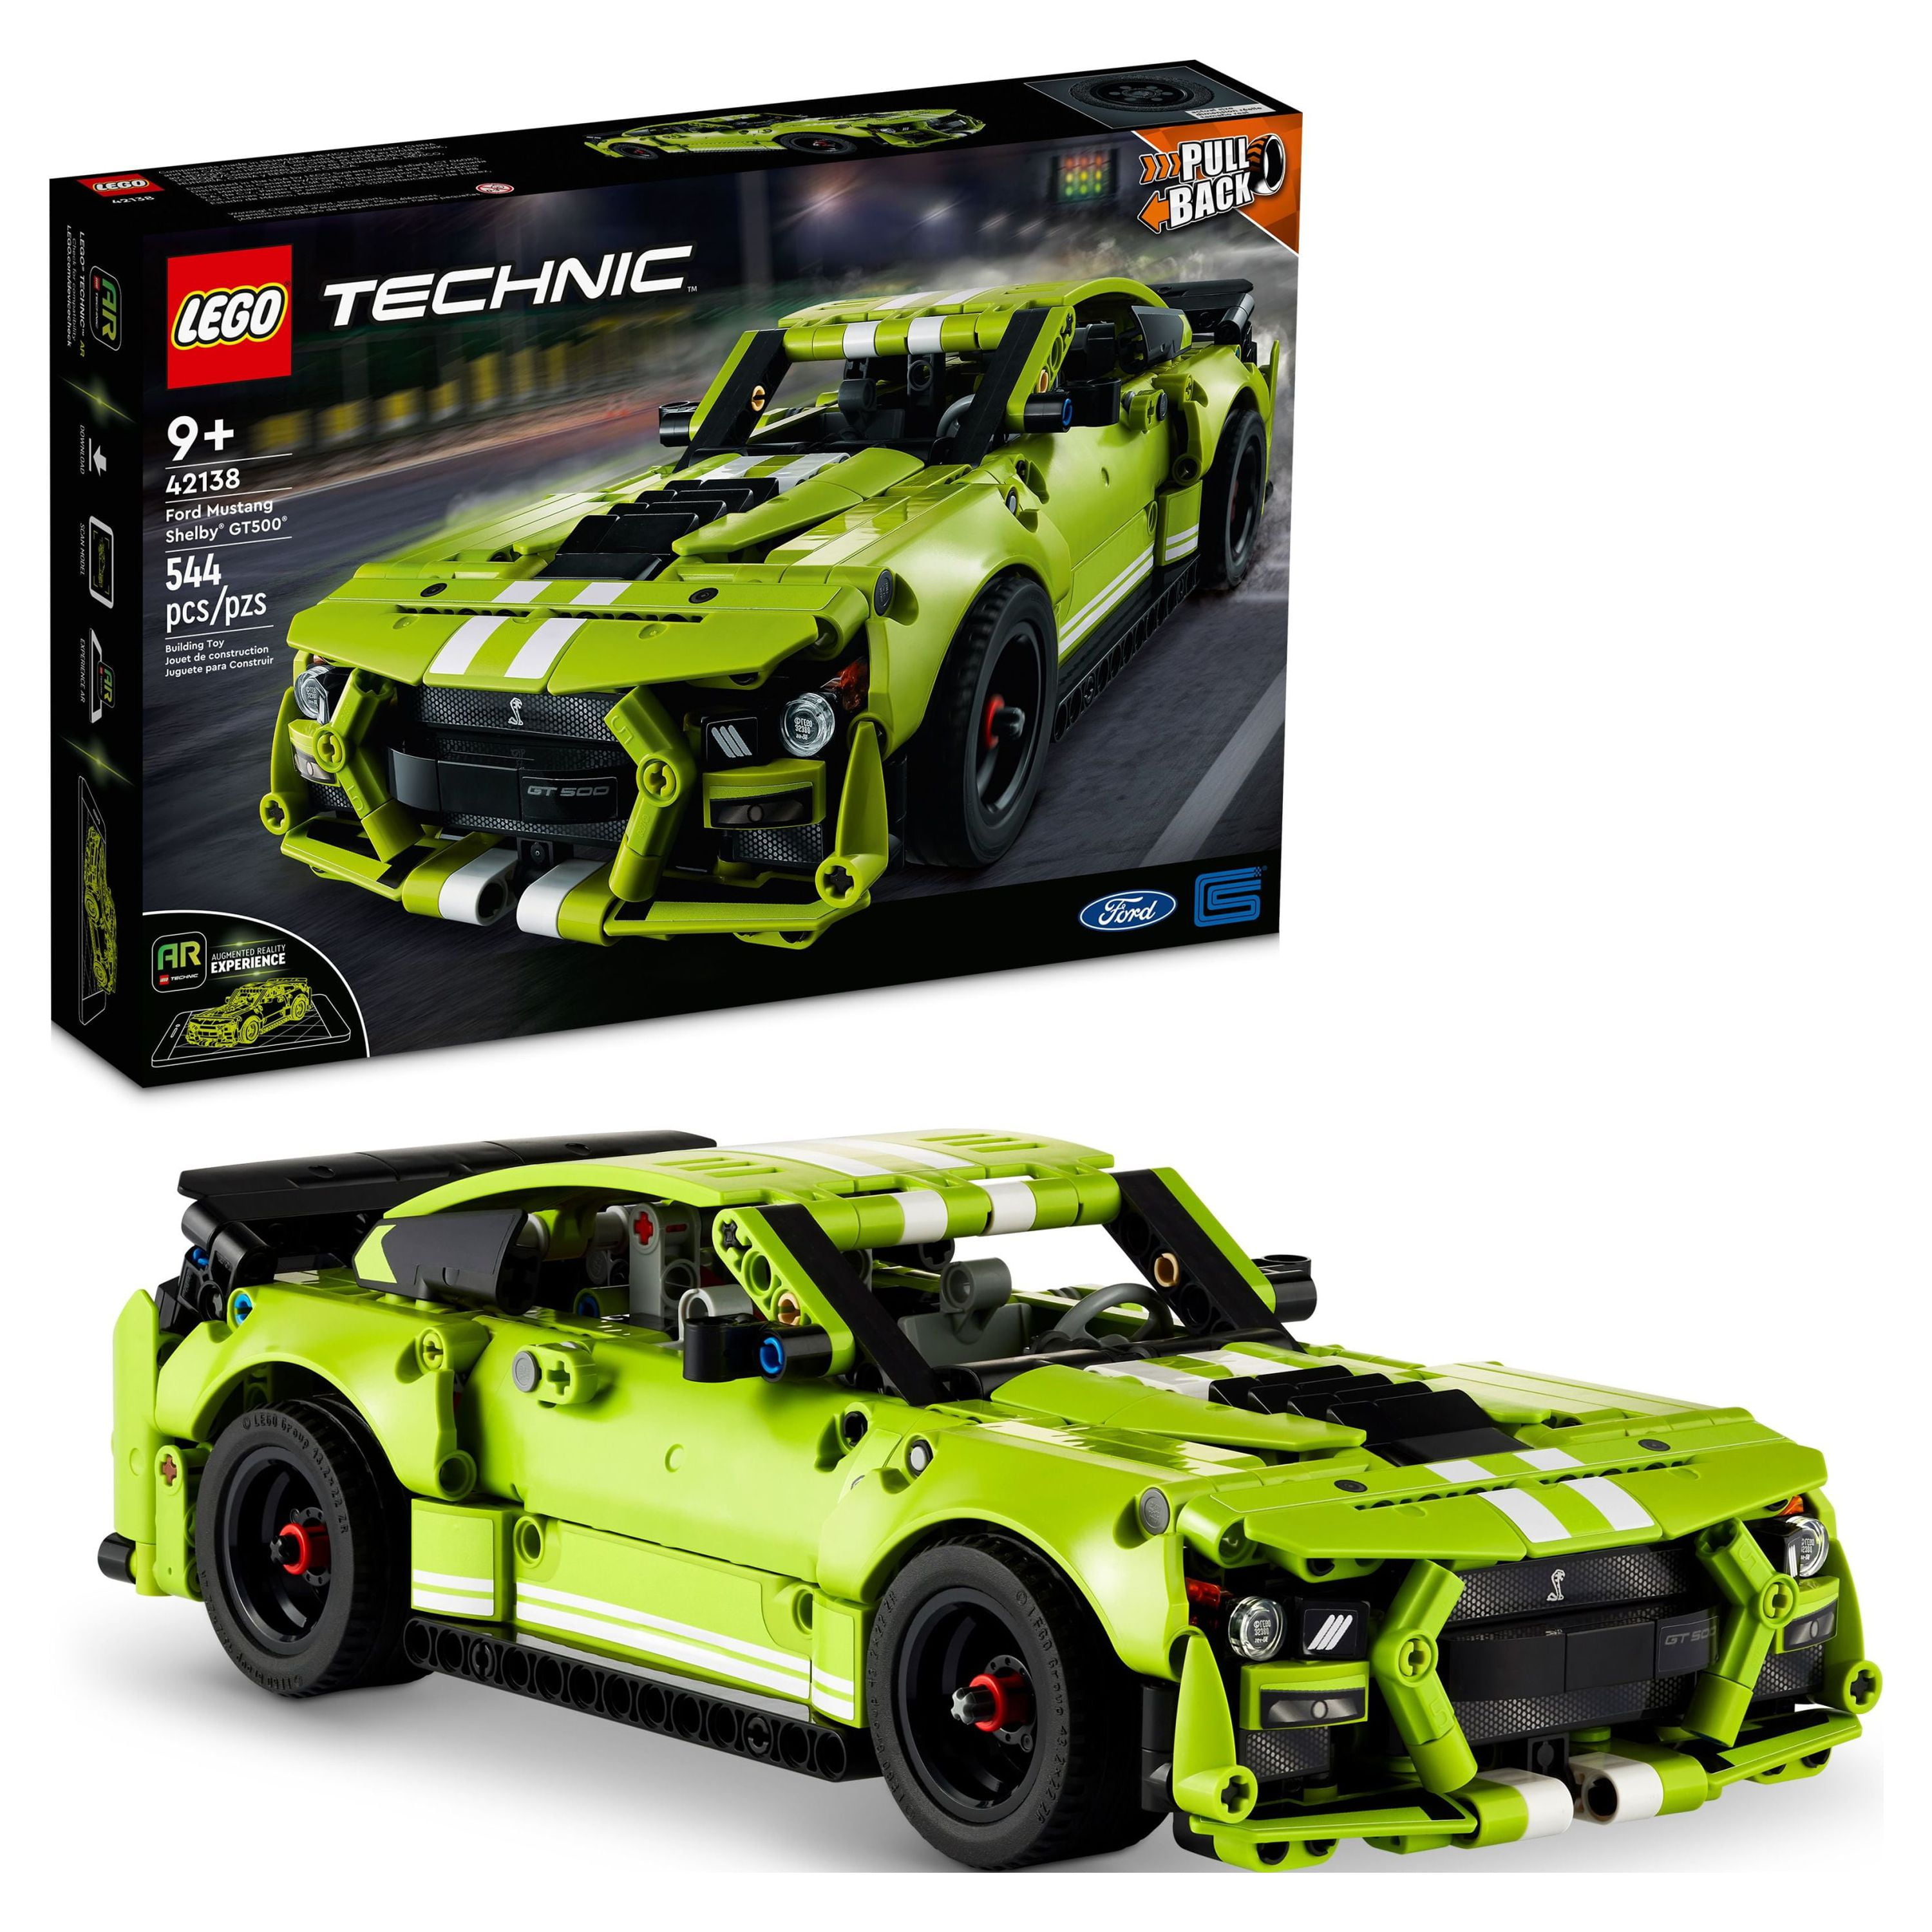 LEGO Technic Ford Mustang Shelby GT500 Building Set 42138 - Pull Back Drag Race Toy Car Model Kit